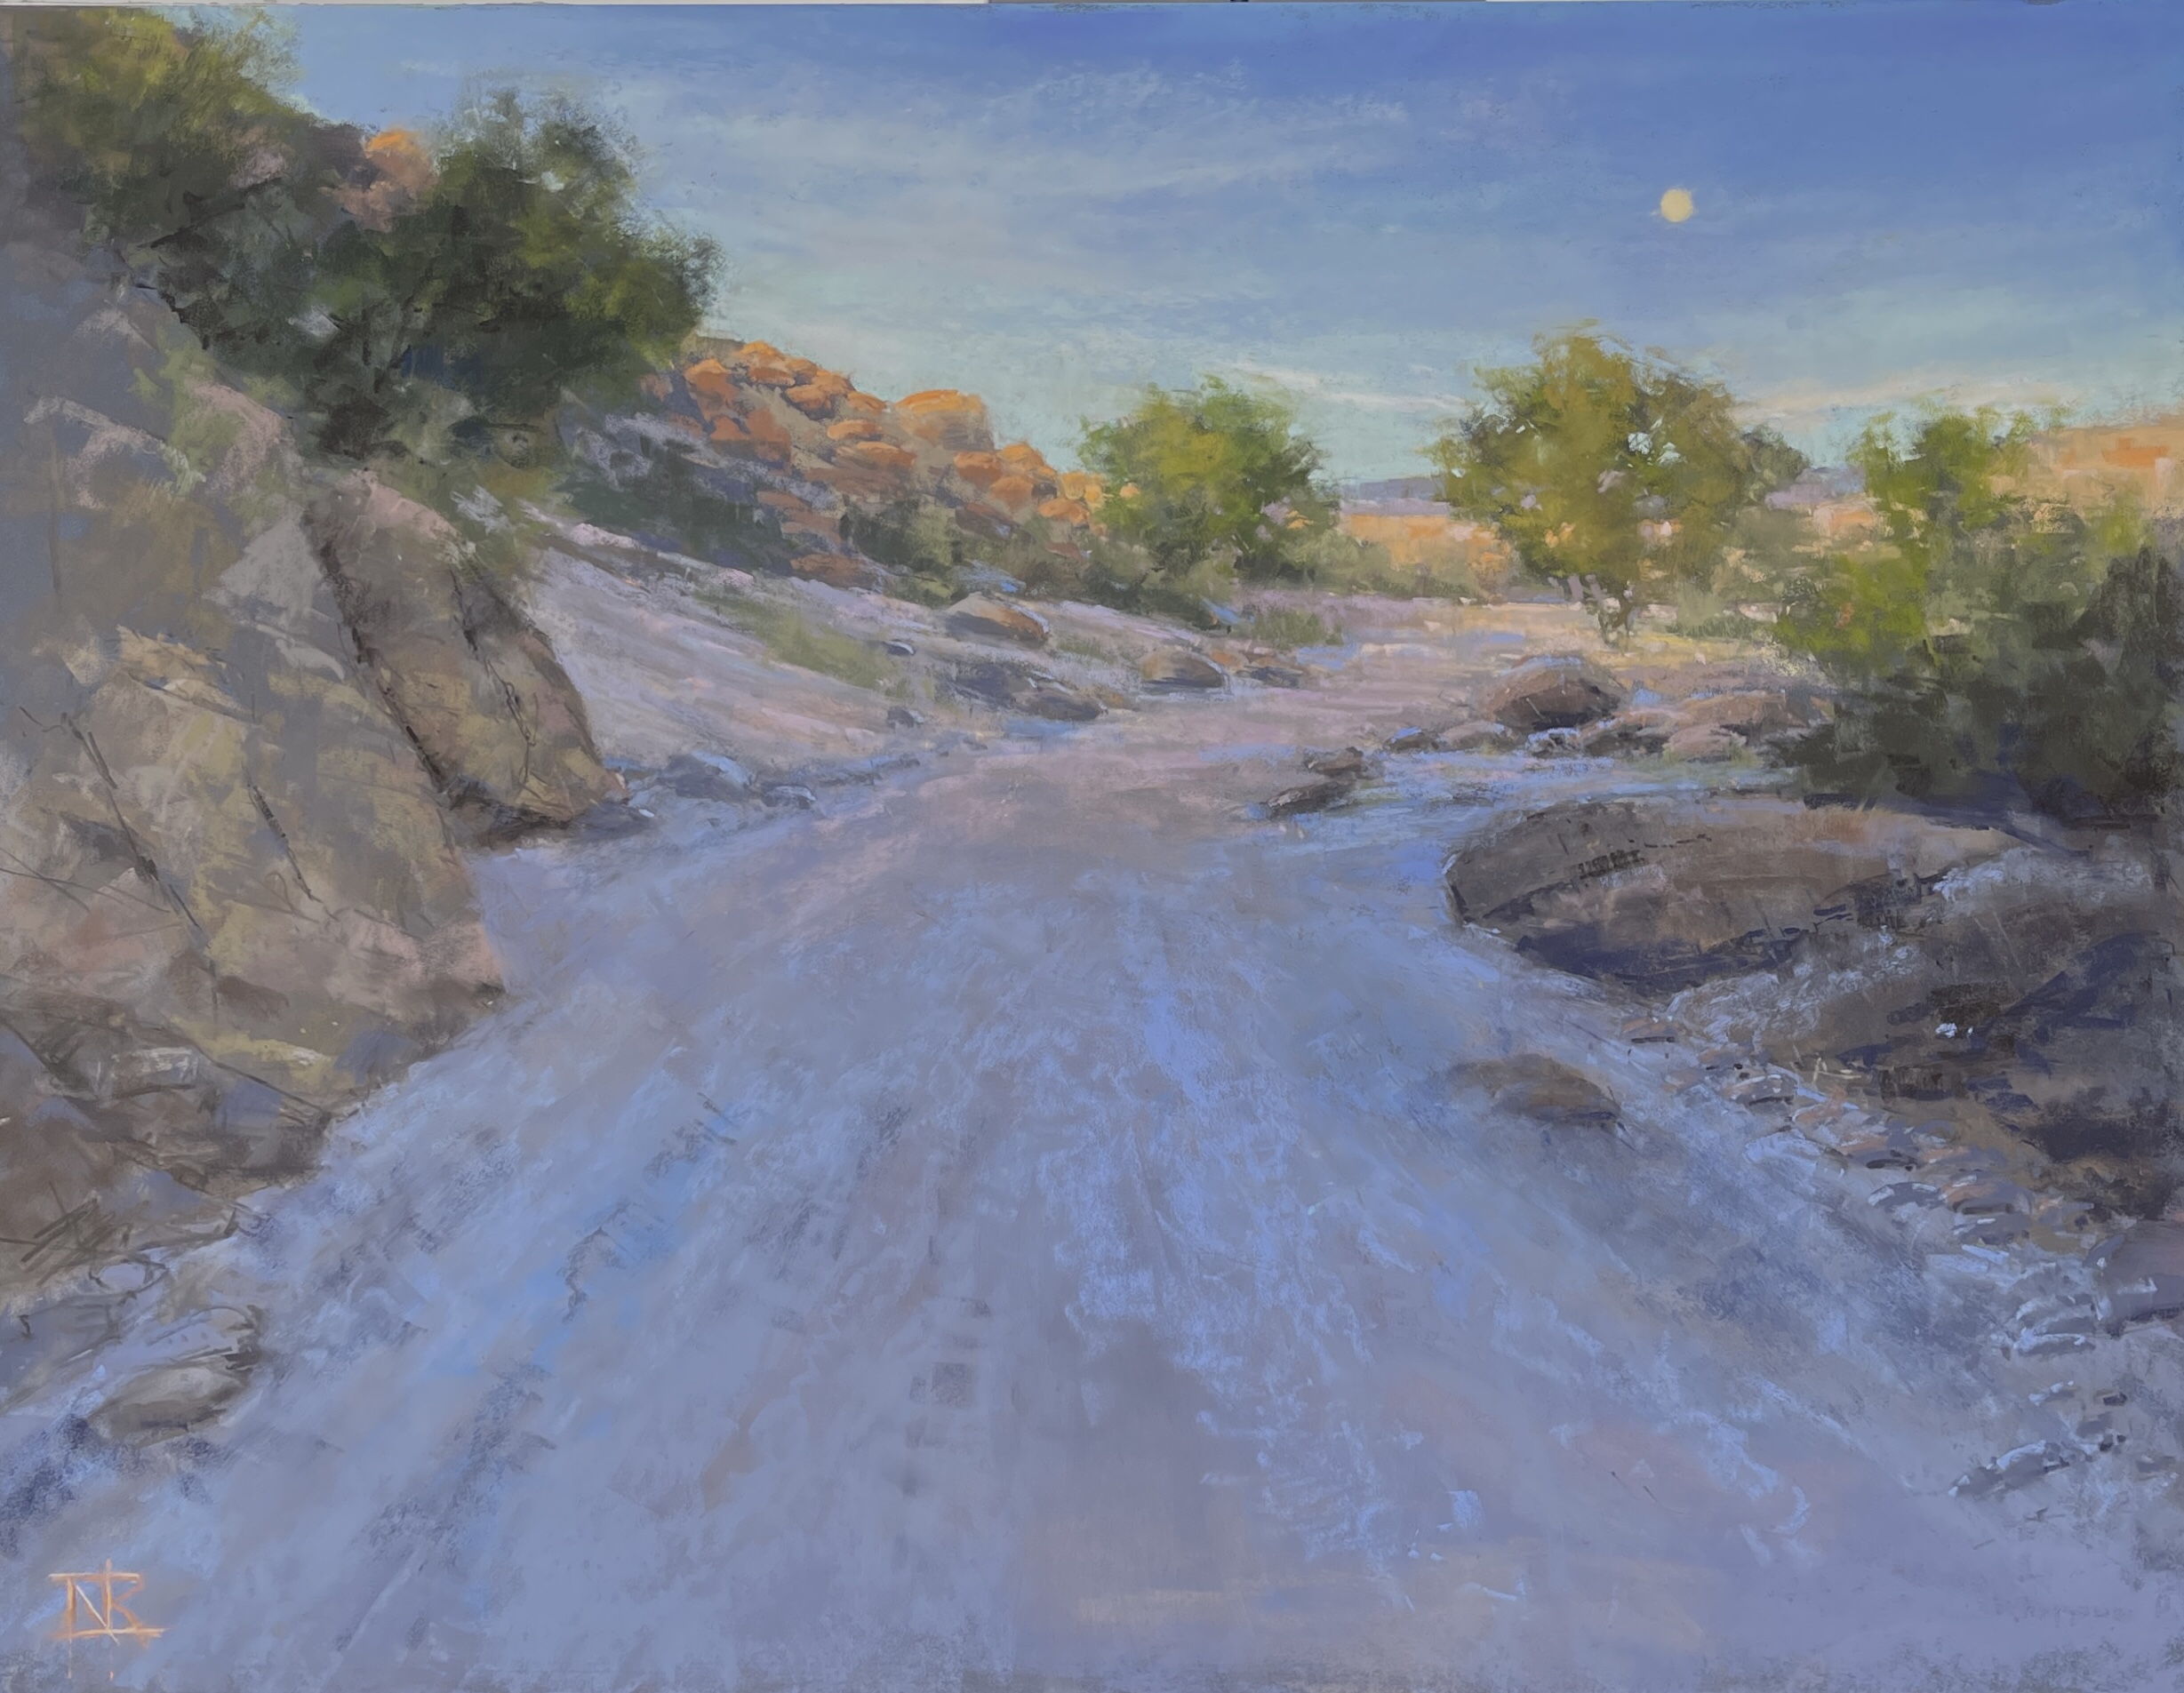 Award of Excellence / Best Pastel: “Borrego in the Nude Wash” by Natalie Richards